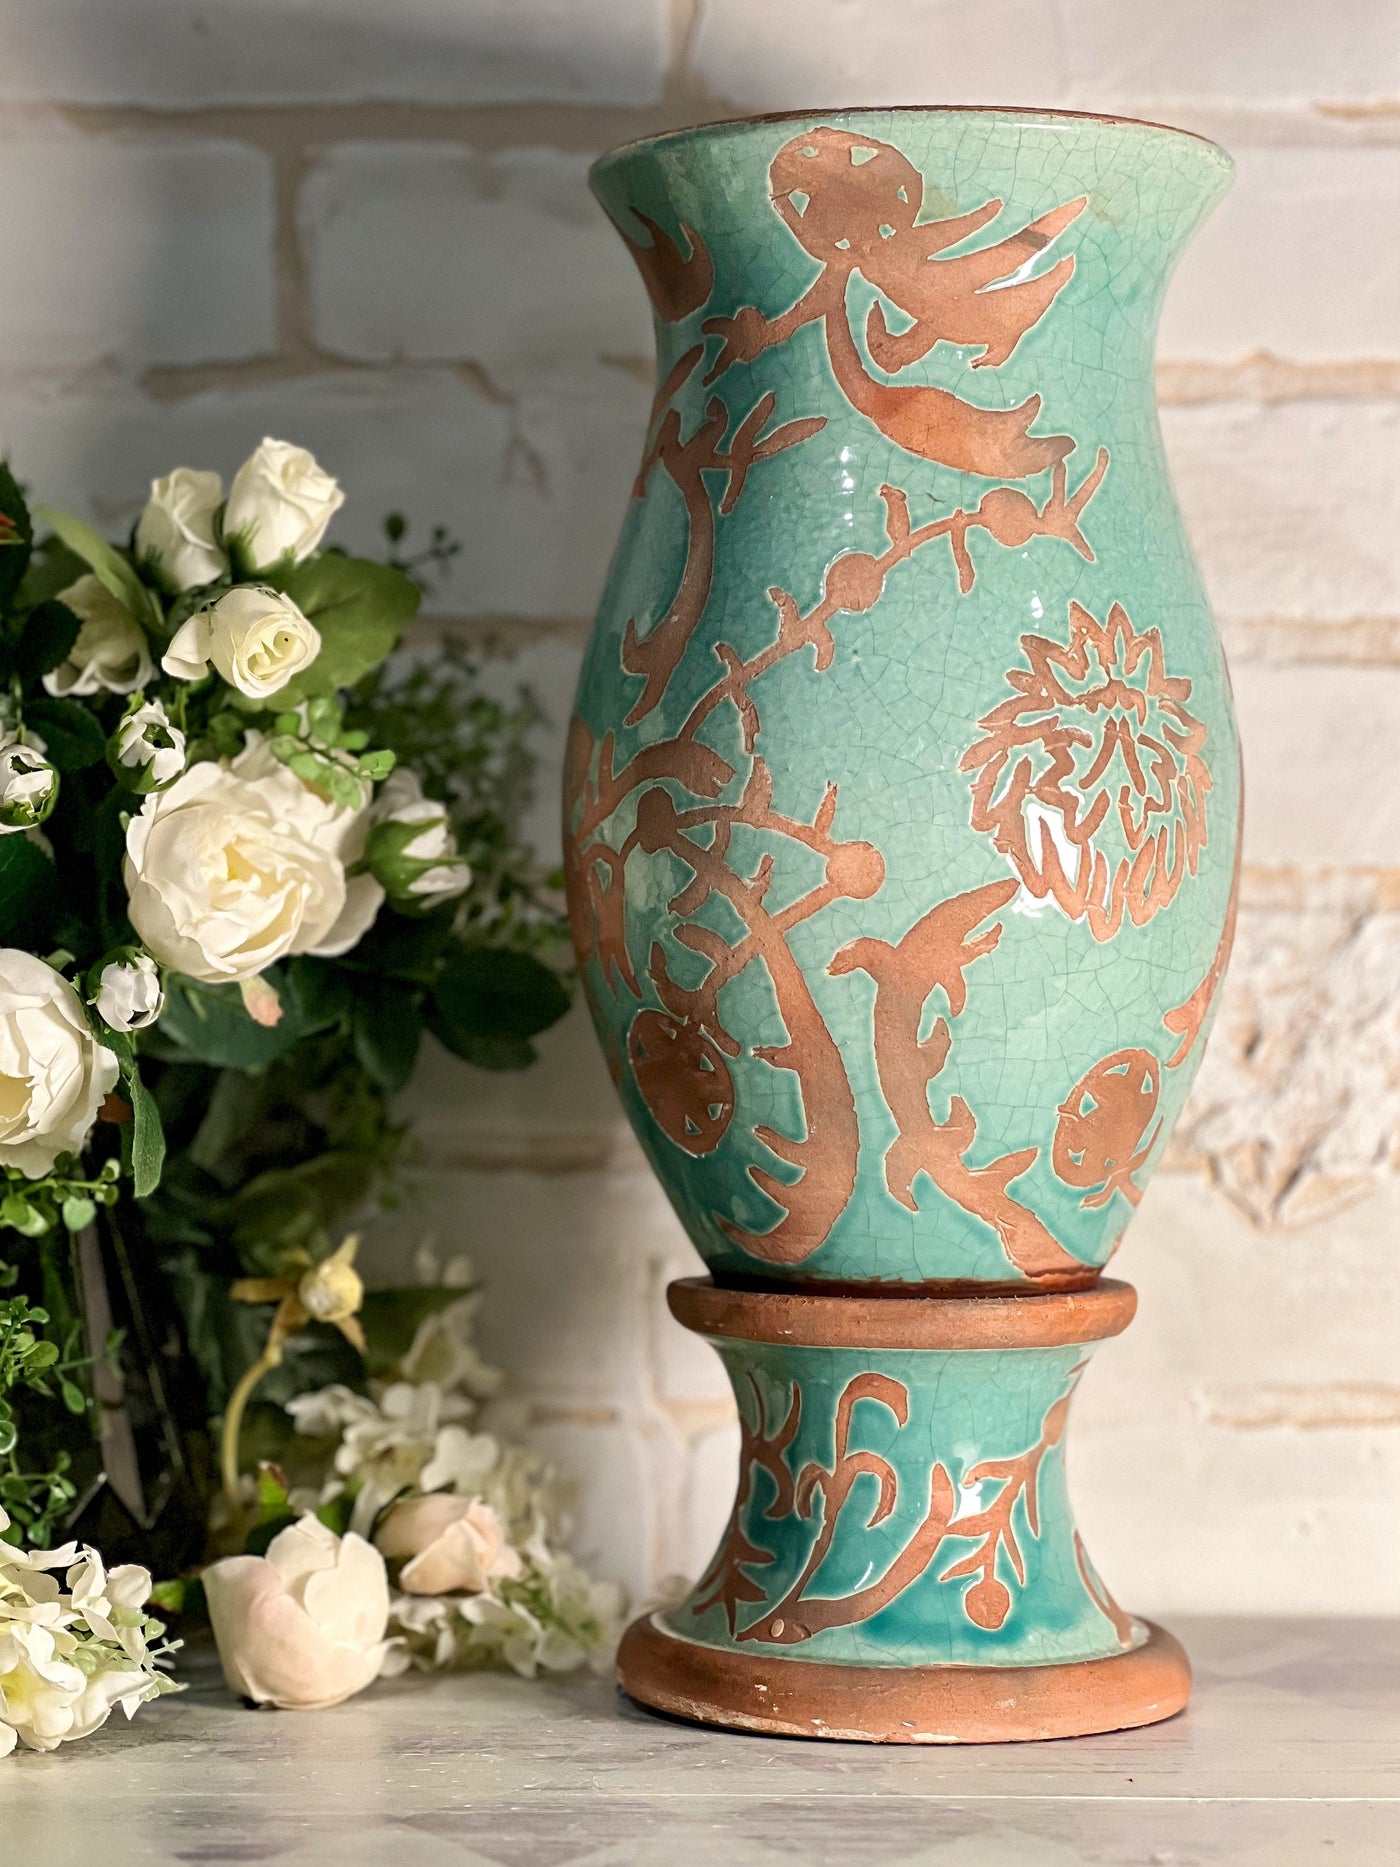 TALL TURQUOISE PATTERNED CLAY VASE ON PEDESTAL Revive In Style Vintage Furniture Painted Refinished Redesign Beautiful One of a Kind Artistic Antique Unique Home Decor Interior Design French Country Shabby Chic Cottage Farmhouse Grandmillenial Coastal Chalk Paint Metallic Glam Eclectic Quality Dovetailed Rustic Furniture Painter Pinterest Bedroom Living Room Entryway Kitchen Home Trends House Styles Decorating ideas